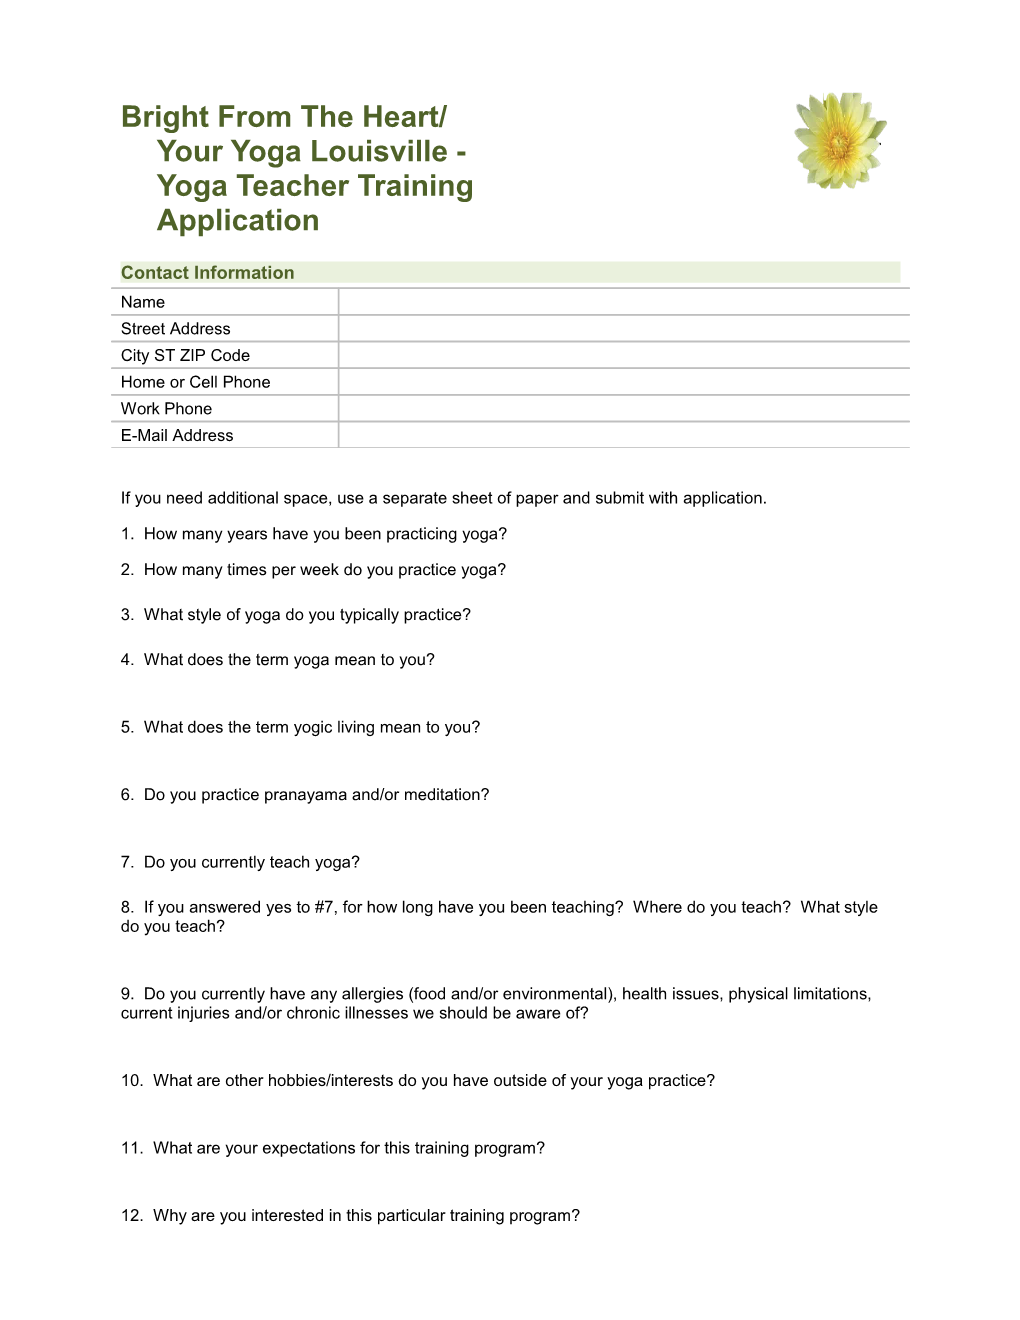 Bright from the Heart/ Your Yoga Louisville - Yoga Teacher Training Application